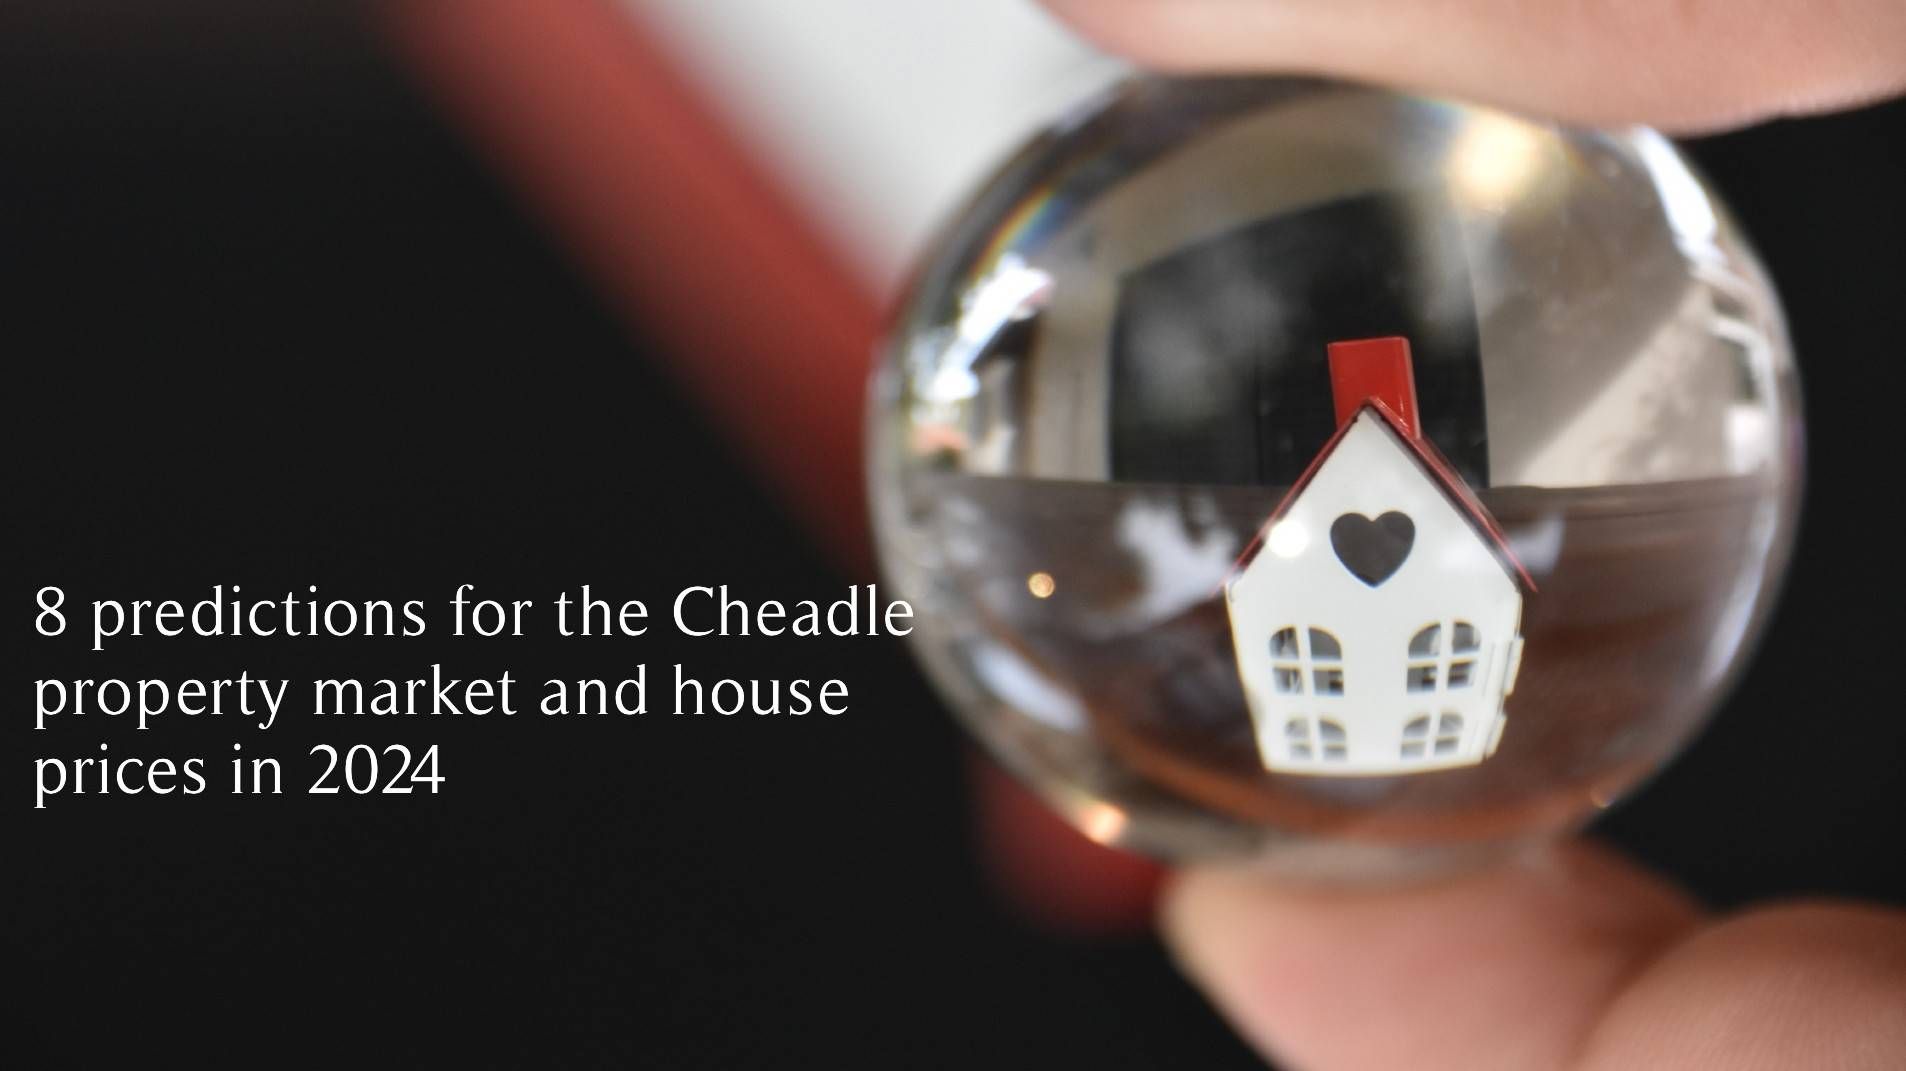 What will happen to Cheadle house prices in 2024?